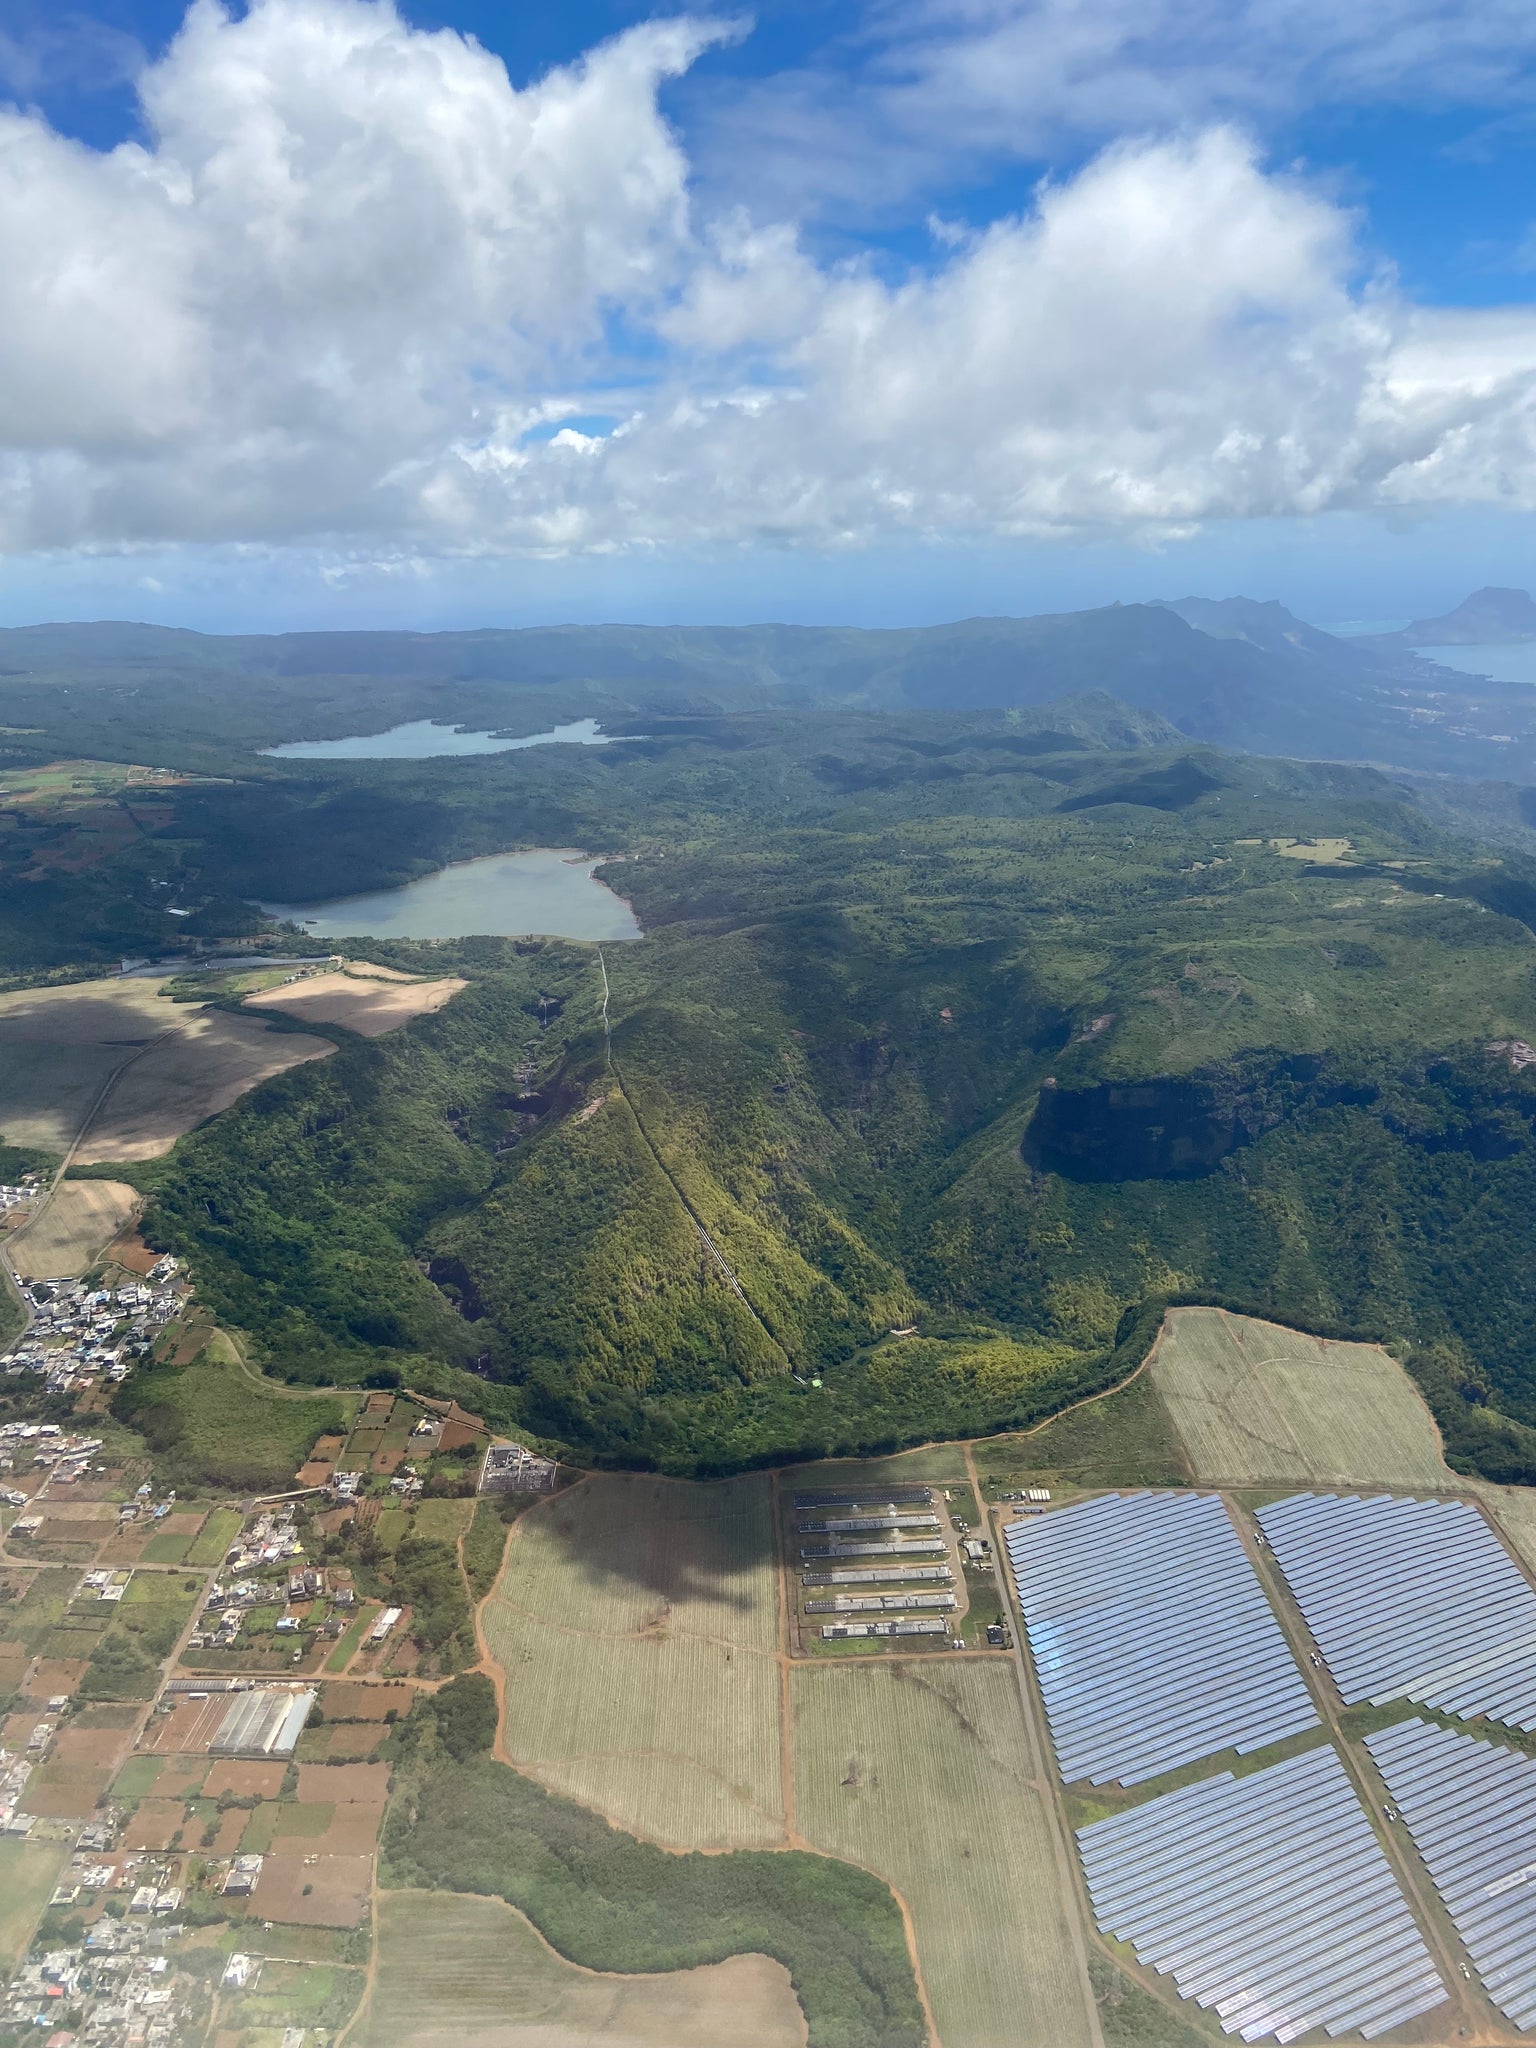 View from above of mountains in Mauritius with solar farm and water station 